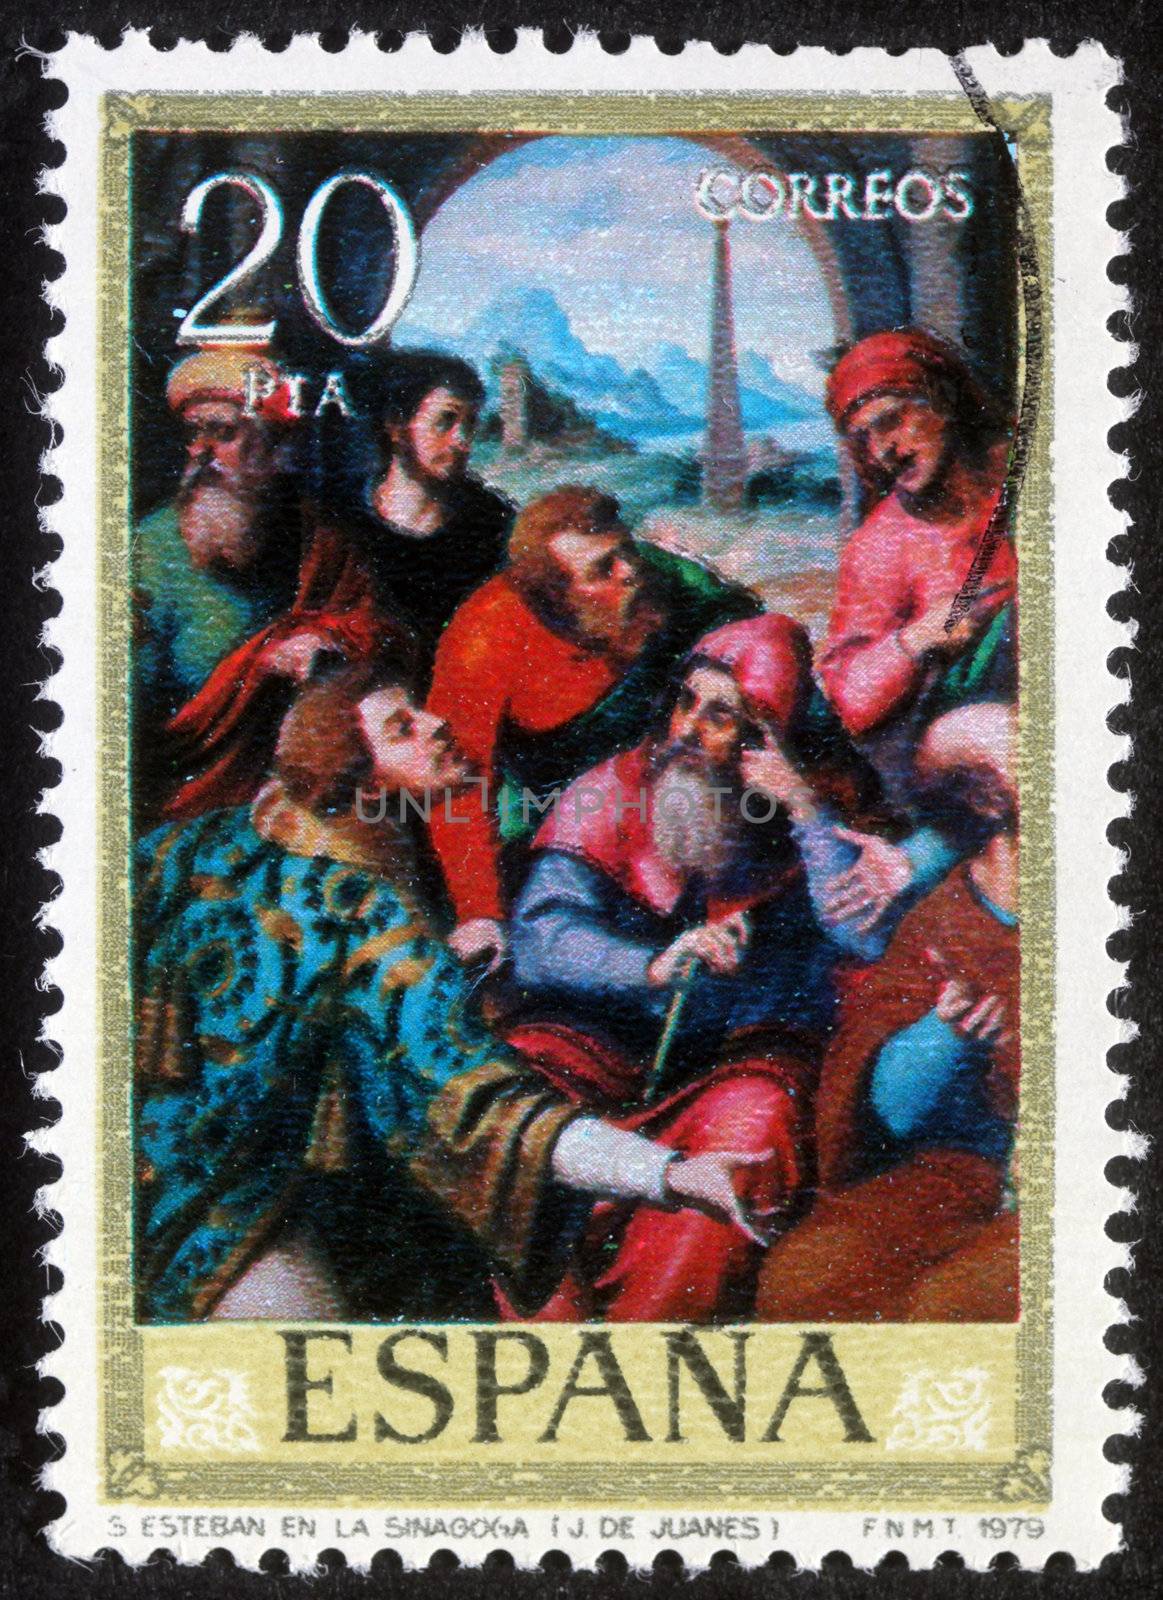 SPAIN - CIRCA 1979: A stamp printed in Spain shows St. Stephen in the synagogue